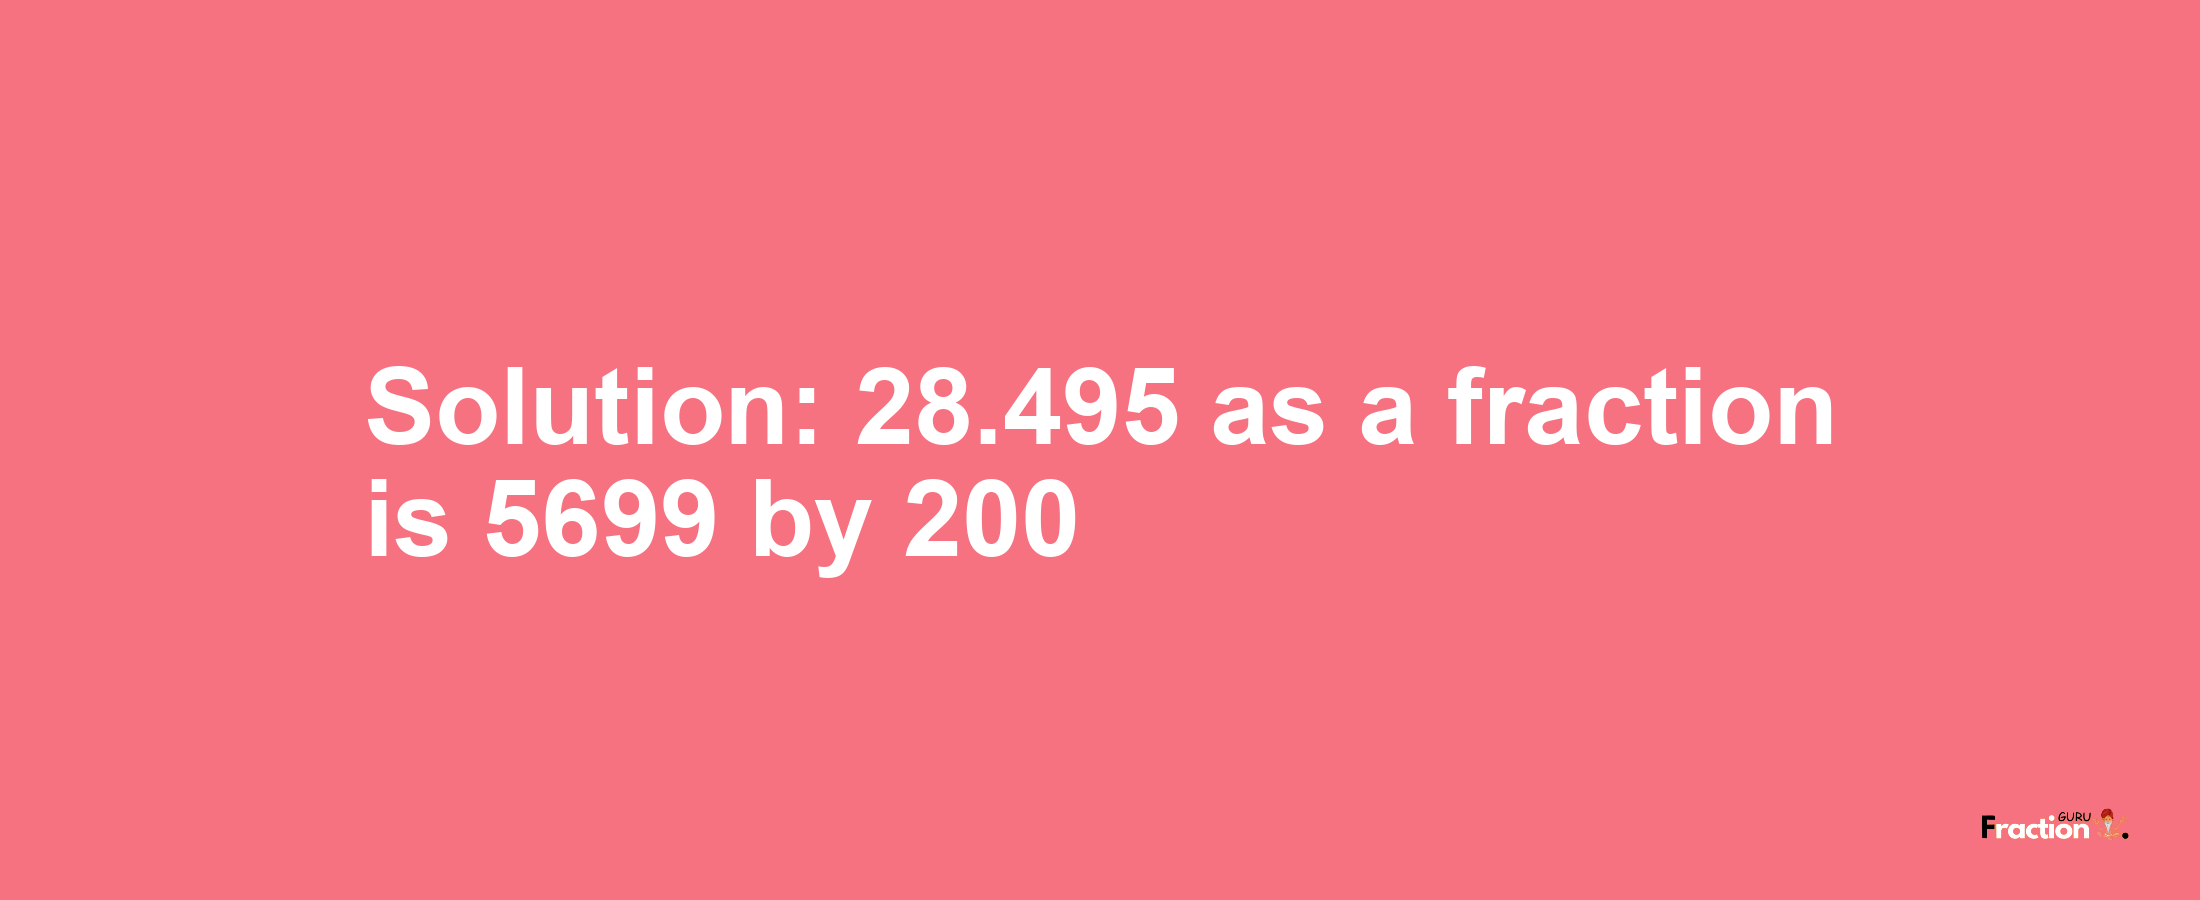 Solution:28.495 as a fraction is 5699/200